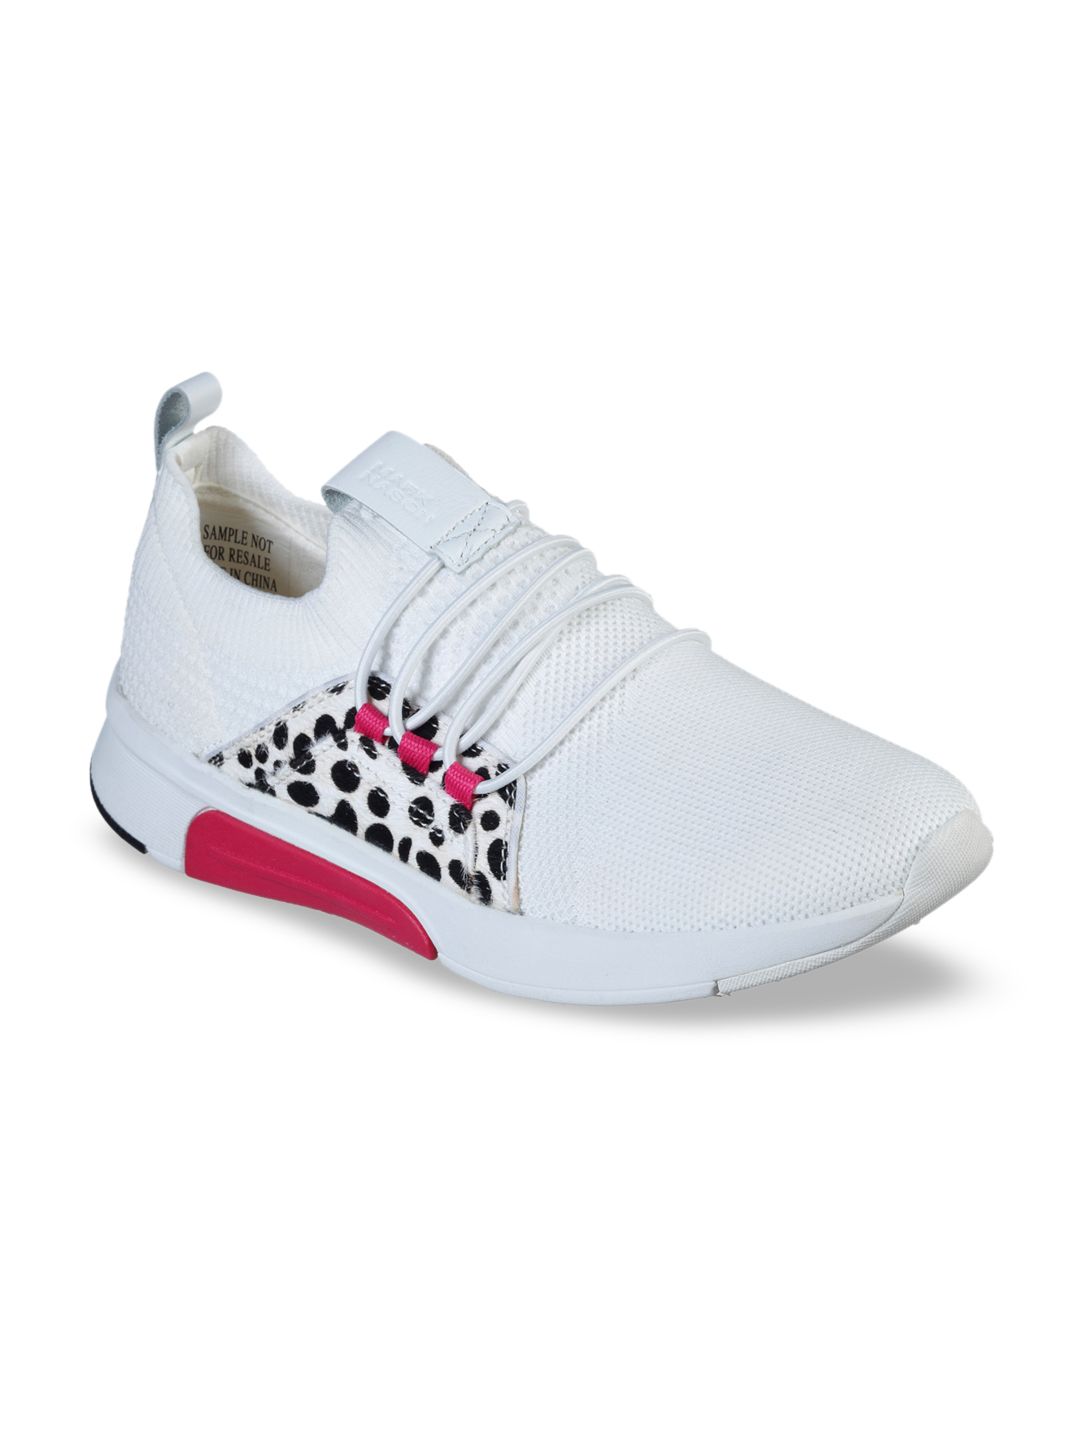 Skechers Women White & Black Printed Casual Shoes Price in India